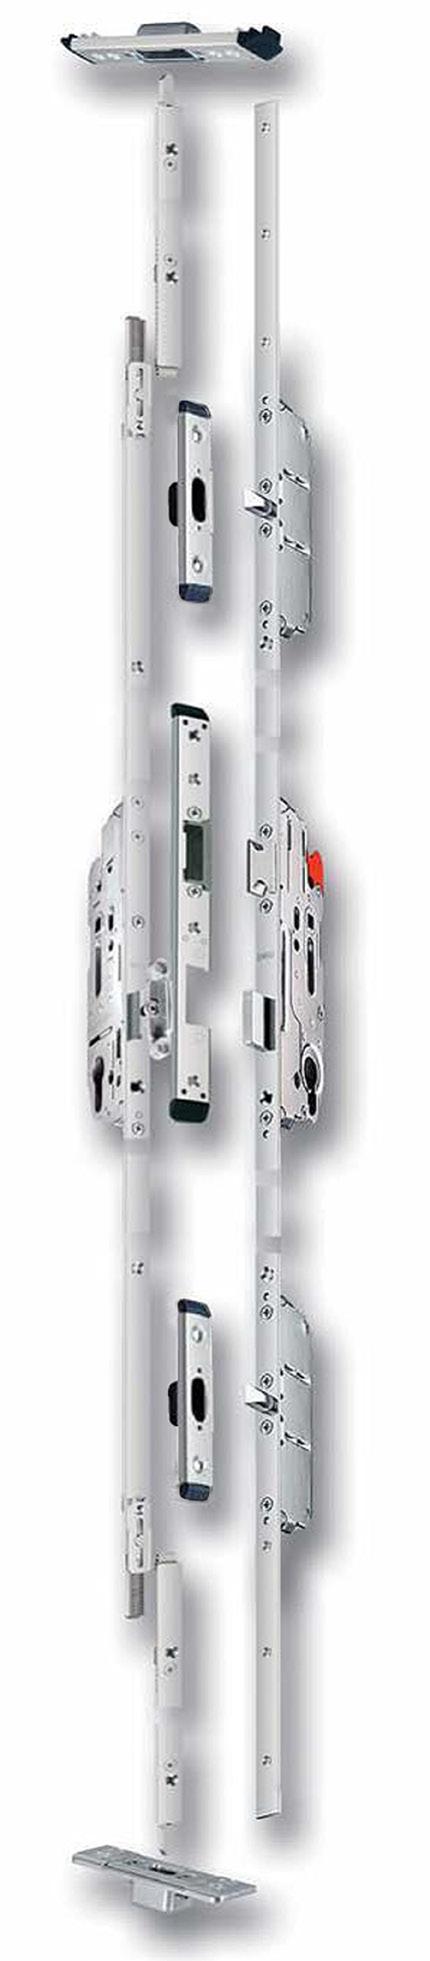 Multipoint lock, panic bar and cylinder successfully tested and conform to EN1125 - Classification 37601322A - Single doors minimum rebate width 700mm, maximum rebate width 1200mm - Double doors